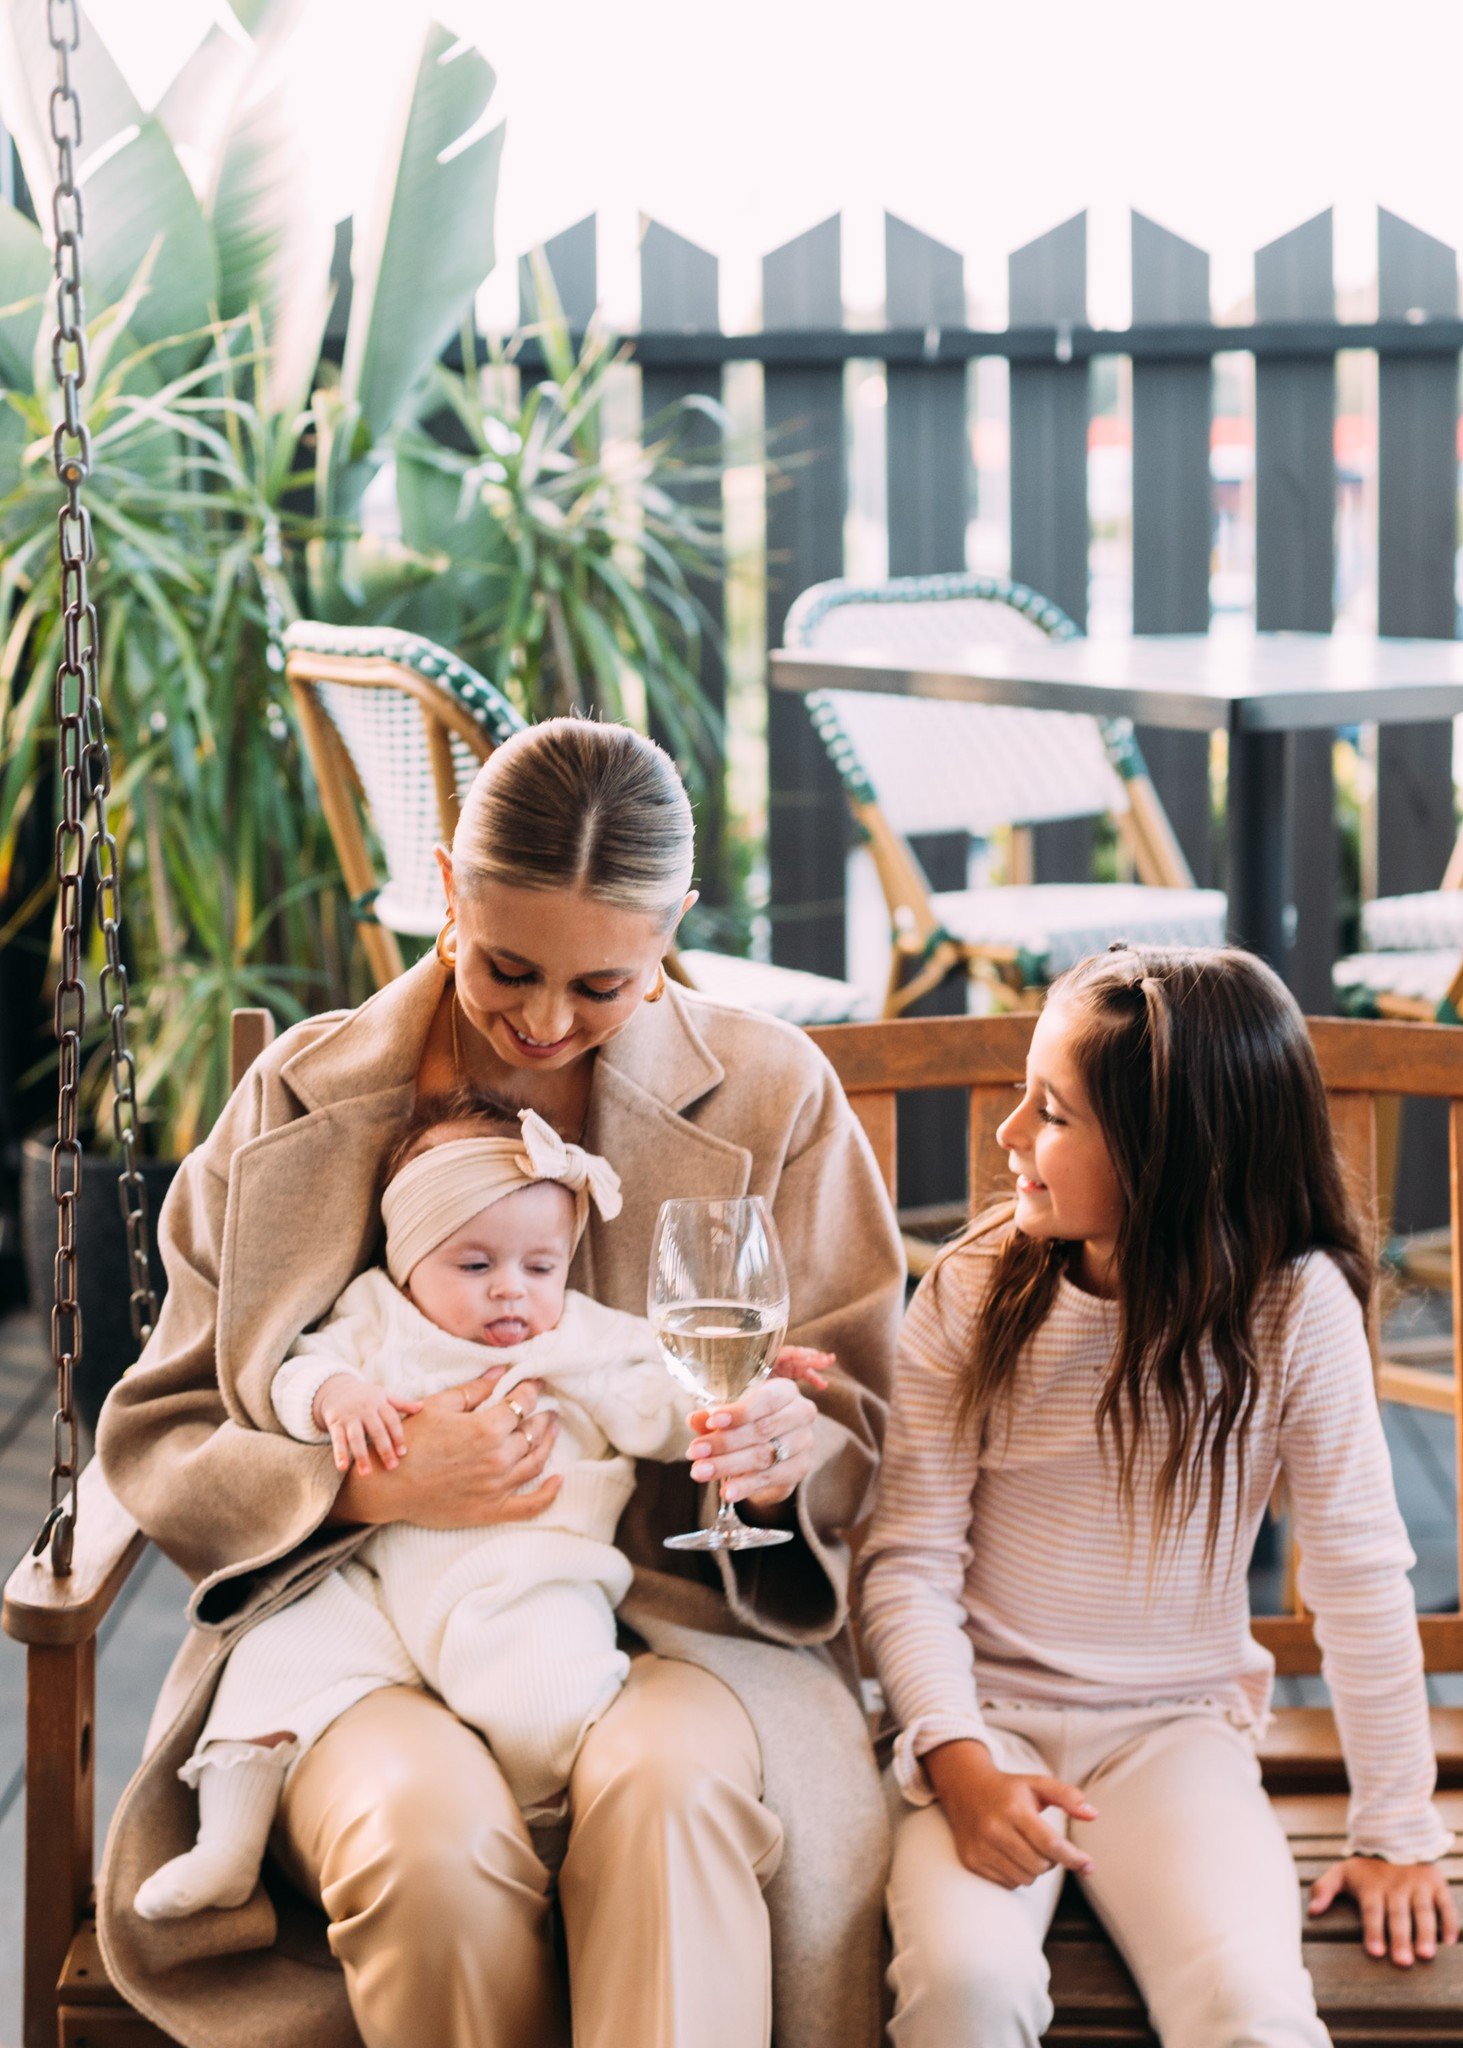 🩷 LOVE YOUR MAMMA THIS MOTHER'S DAY 🩷

Treat Mum 2 weeks of Mamma celebrations from now until Sunday May 12th 🥂

If you're looking for something to do to celebrate Mother's Day, we have our annual Buffet Breakfast for just $30 per adult and $15 pe